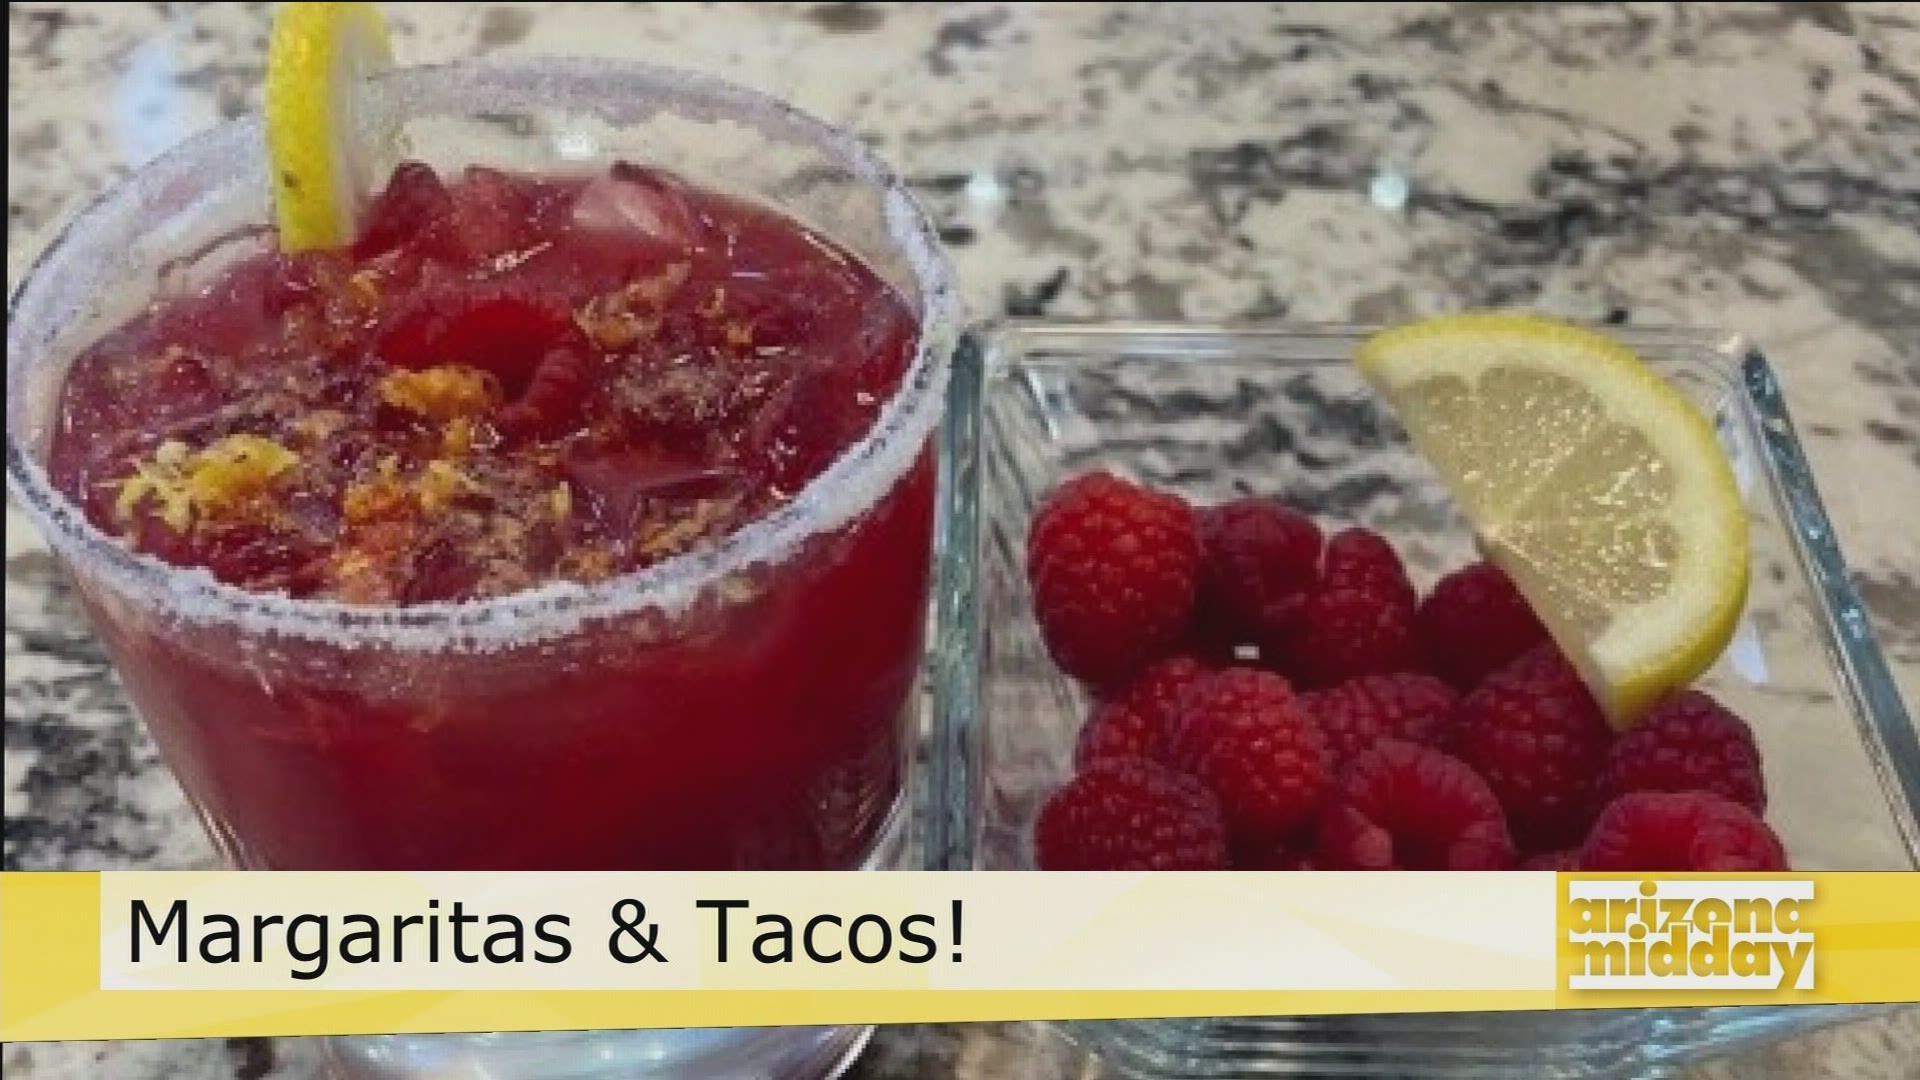 David Borrego, Owner of Urban Margarita, shows us how to create Raspberry Lemon Margarita plus how to celebrate Taco Tuesday at his restaurant with great specials